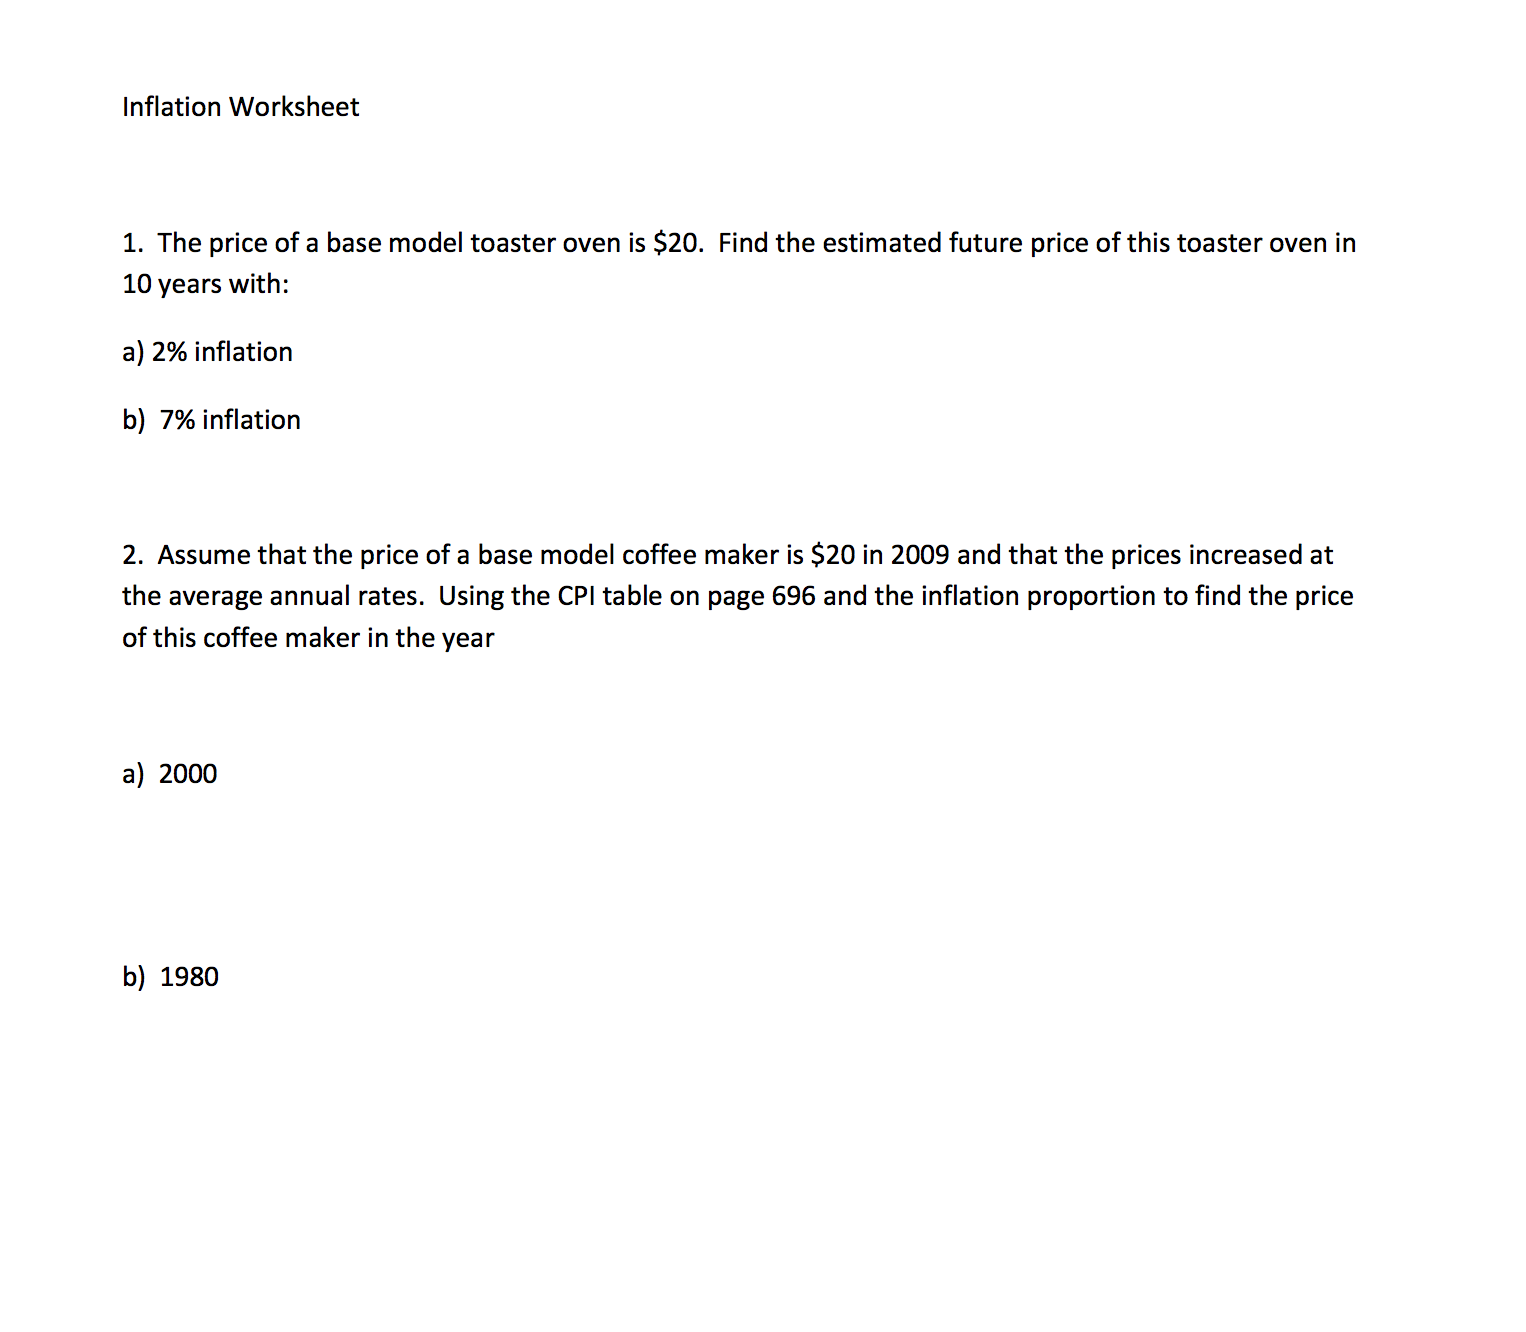 solved-inflation-worksheet-1-the-price-of-a-base-model-t-chegg